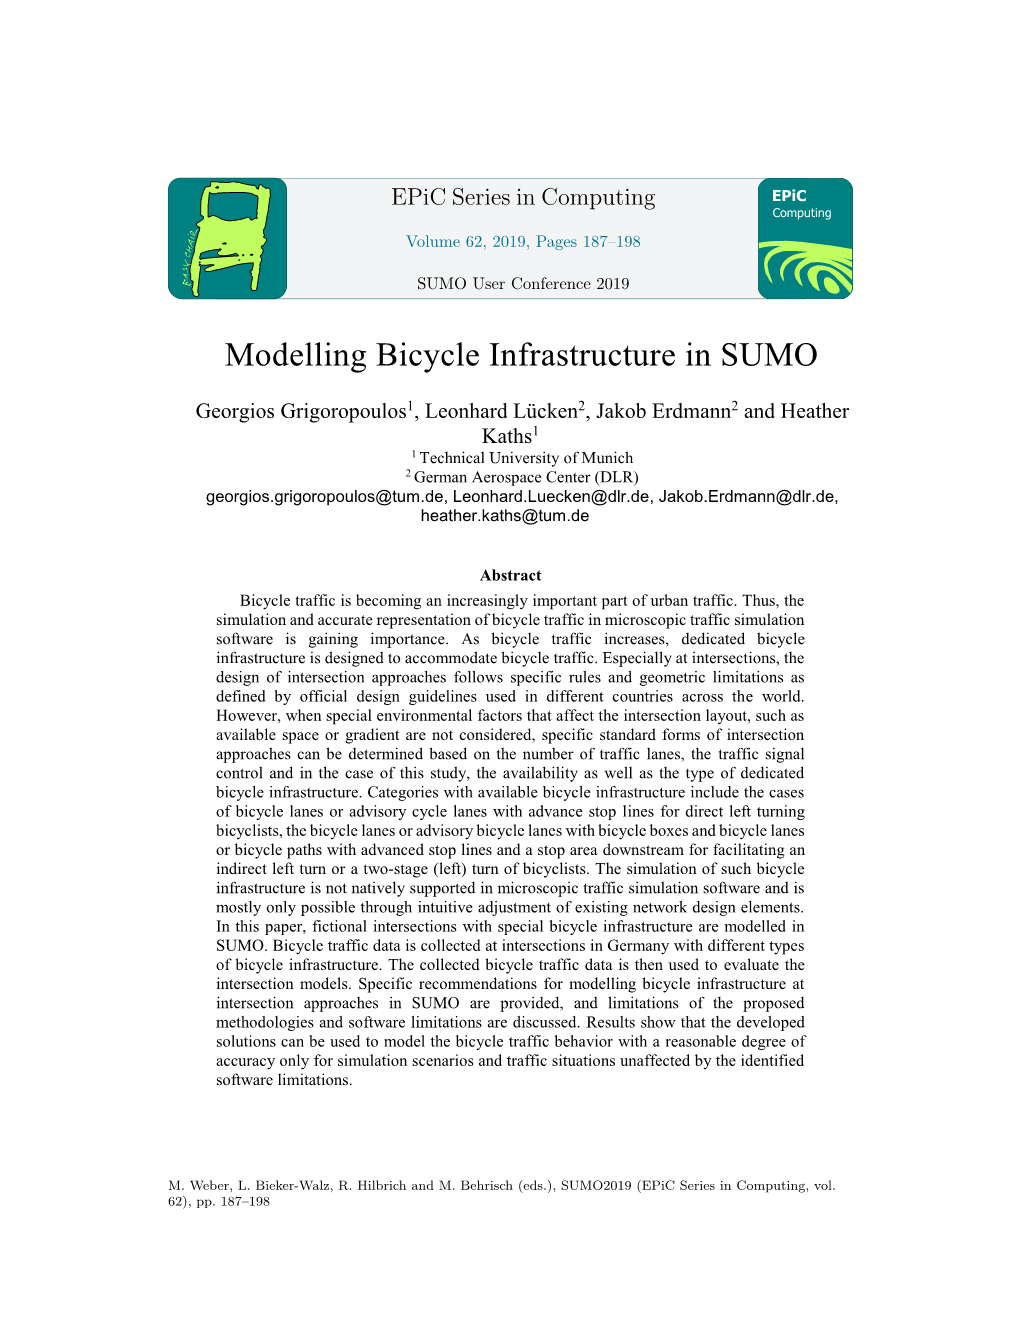 Modelling Bicycle Infrastructure in SUMO